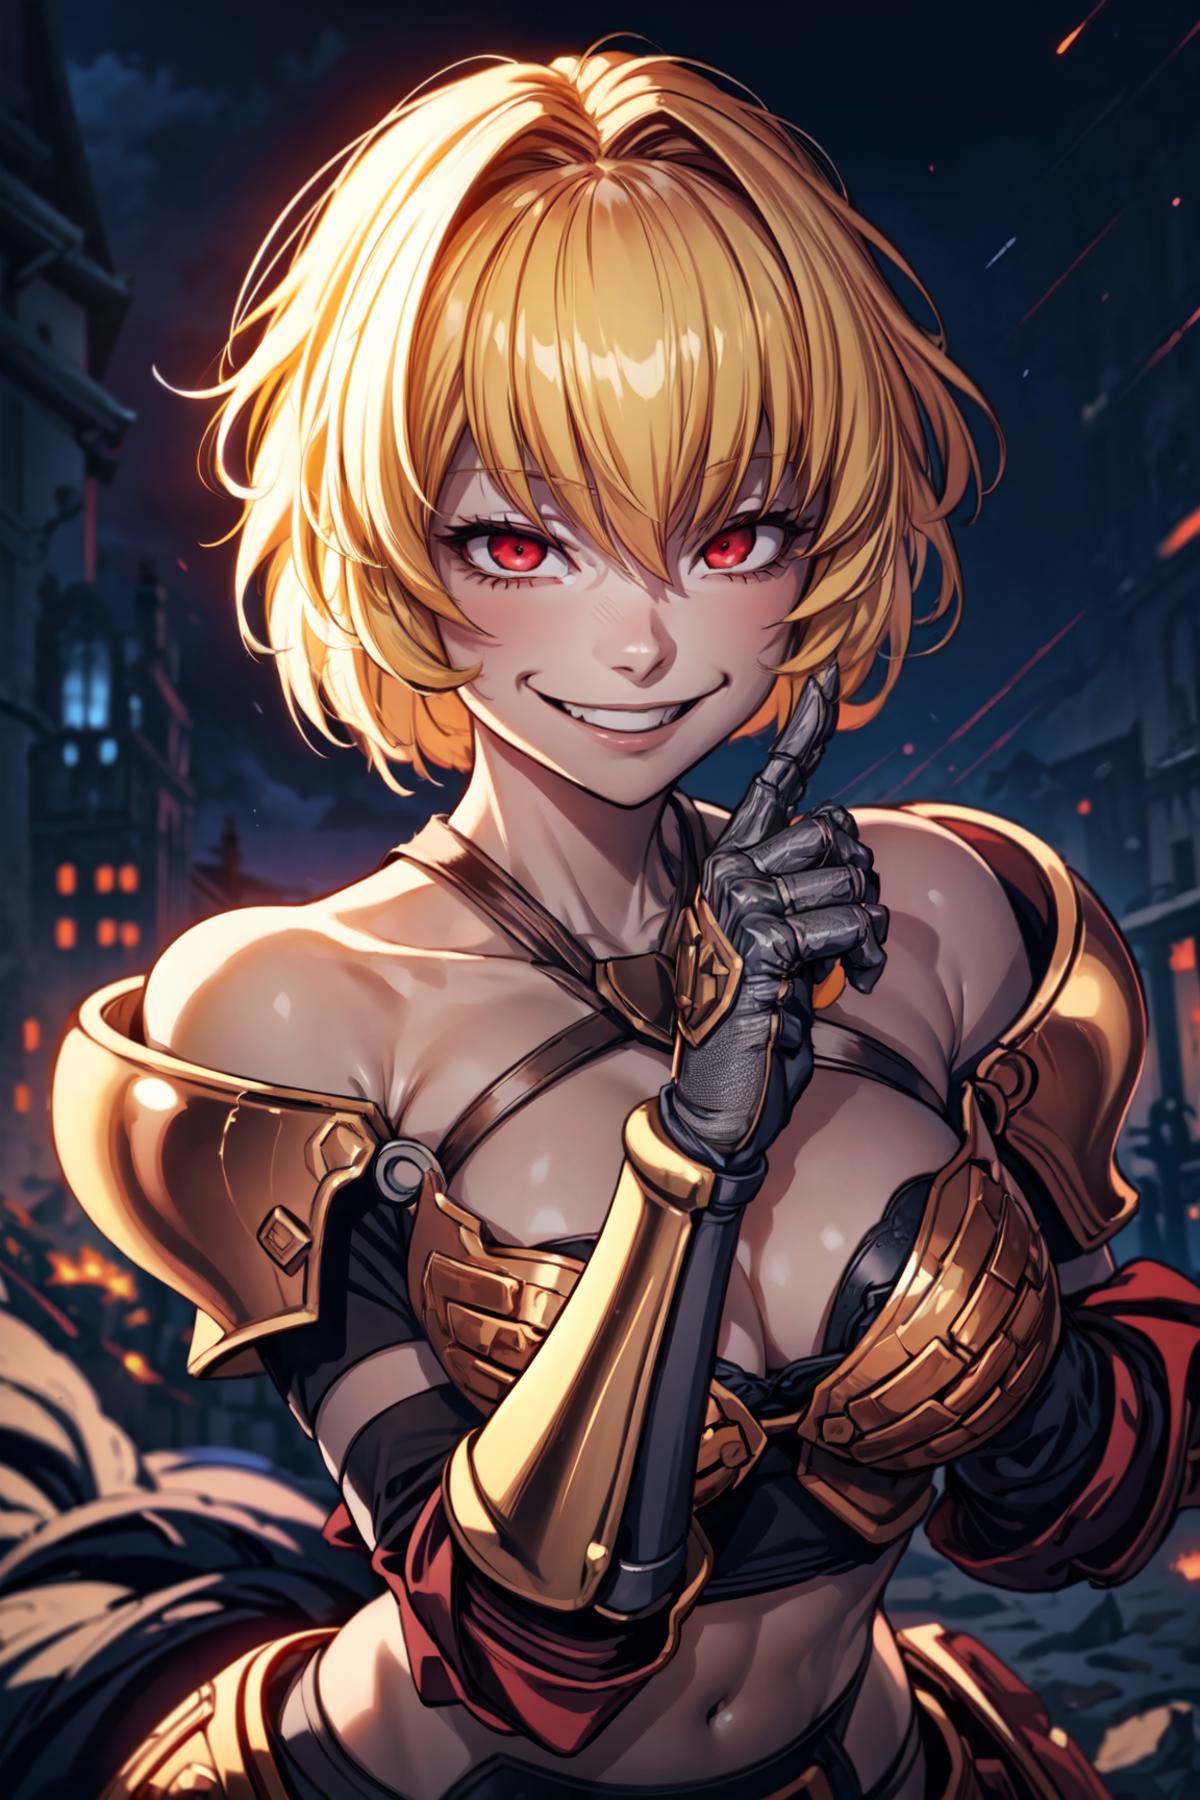 A cartoon image of a woman with blonde hair, wearing gold armor, giving a thumbs up.